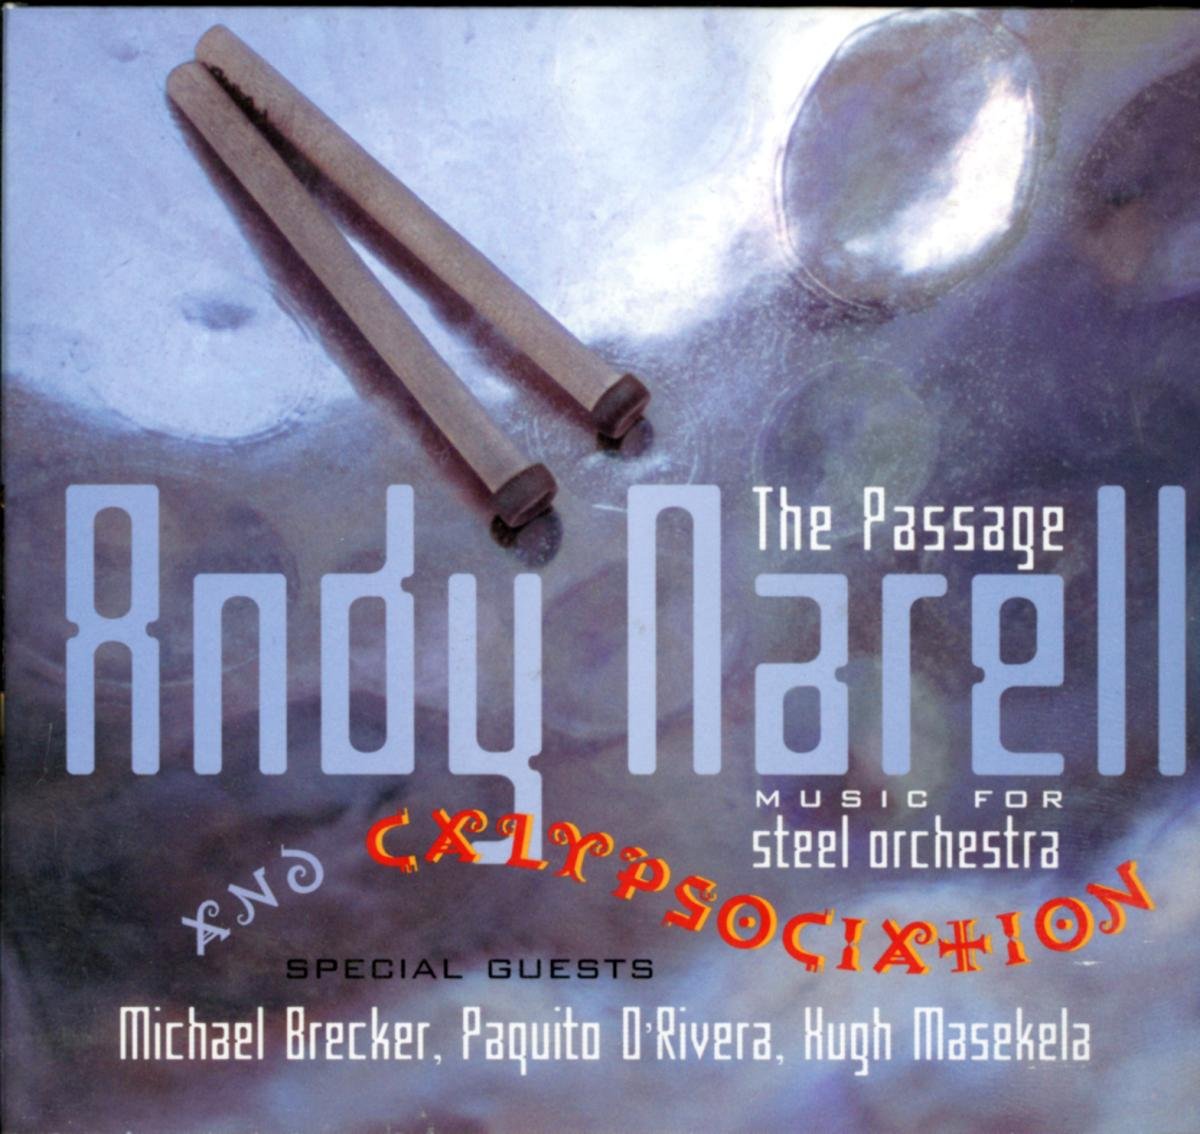 Andy Narell And Calypsociation: The Passage - Music For Steel Orchestra